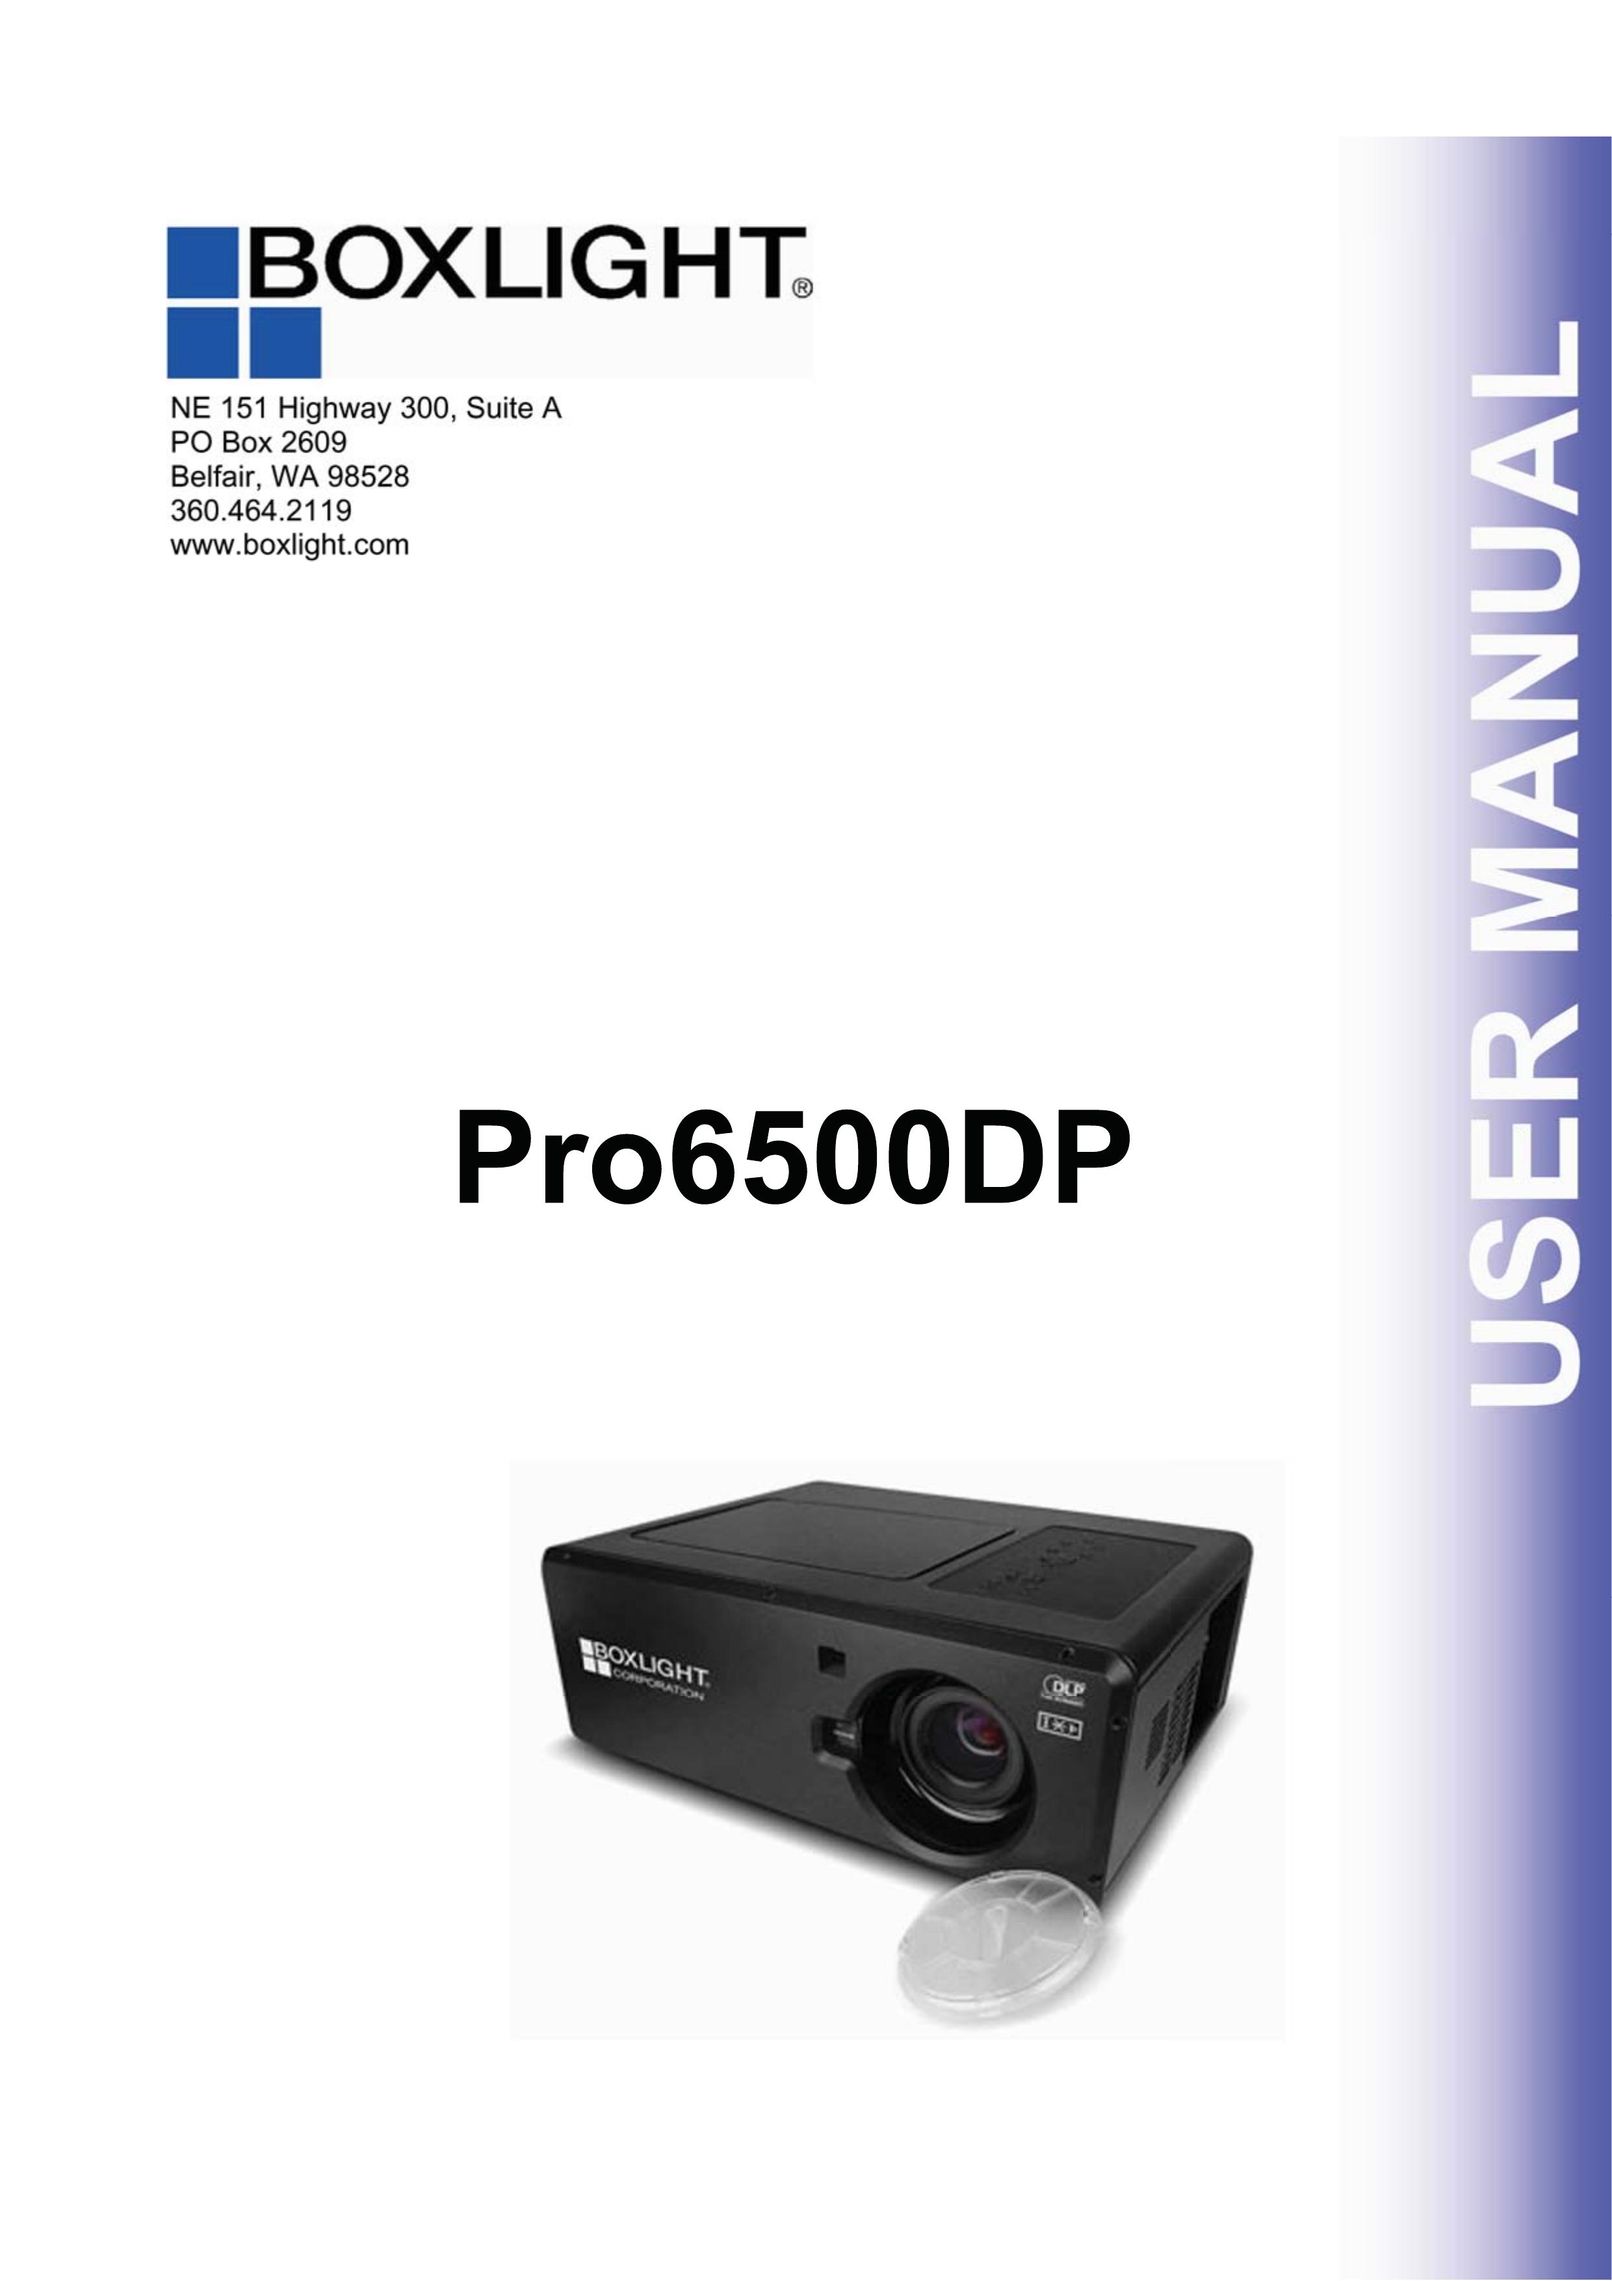 BOXLIGHT Pro6500DP Projection Television User Manual